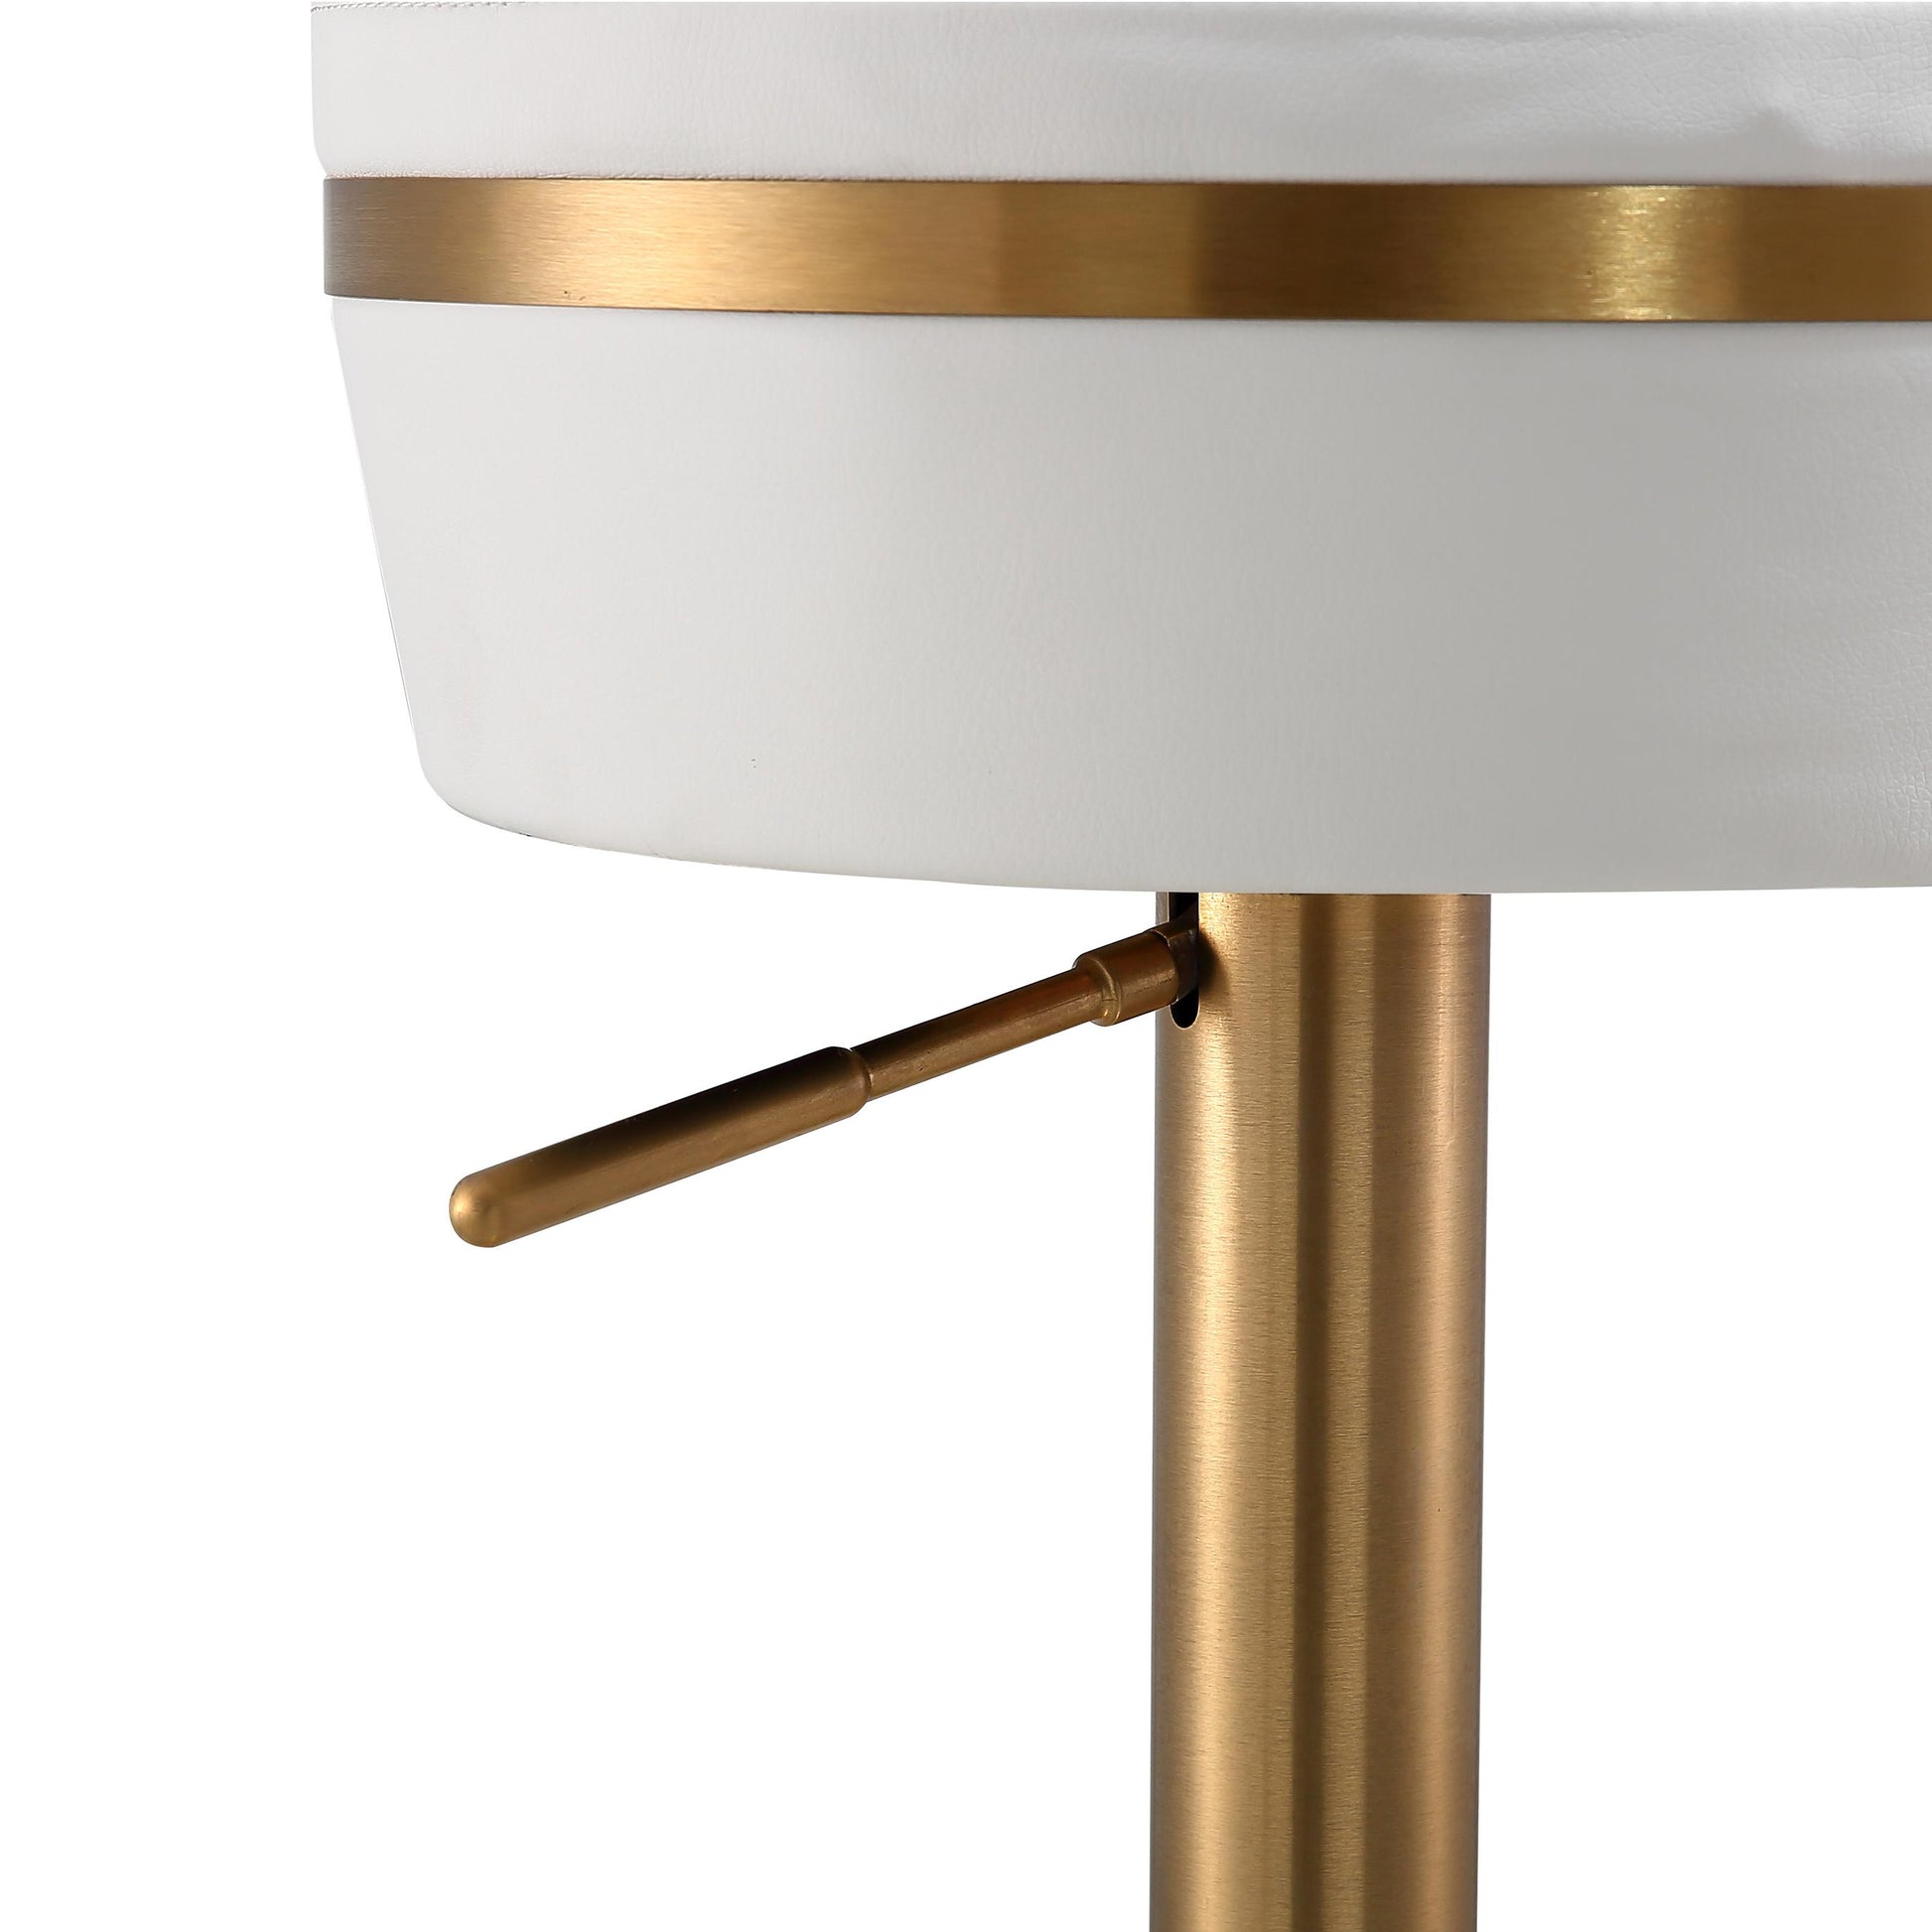 Tov Furniture Astro White and Gold Adjustable Stool